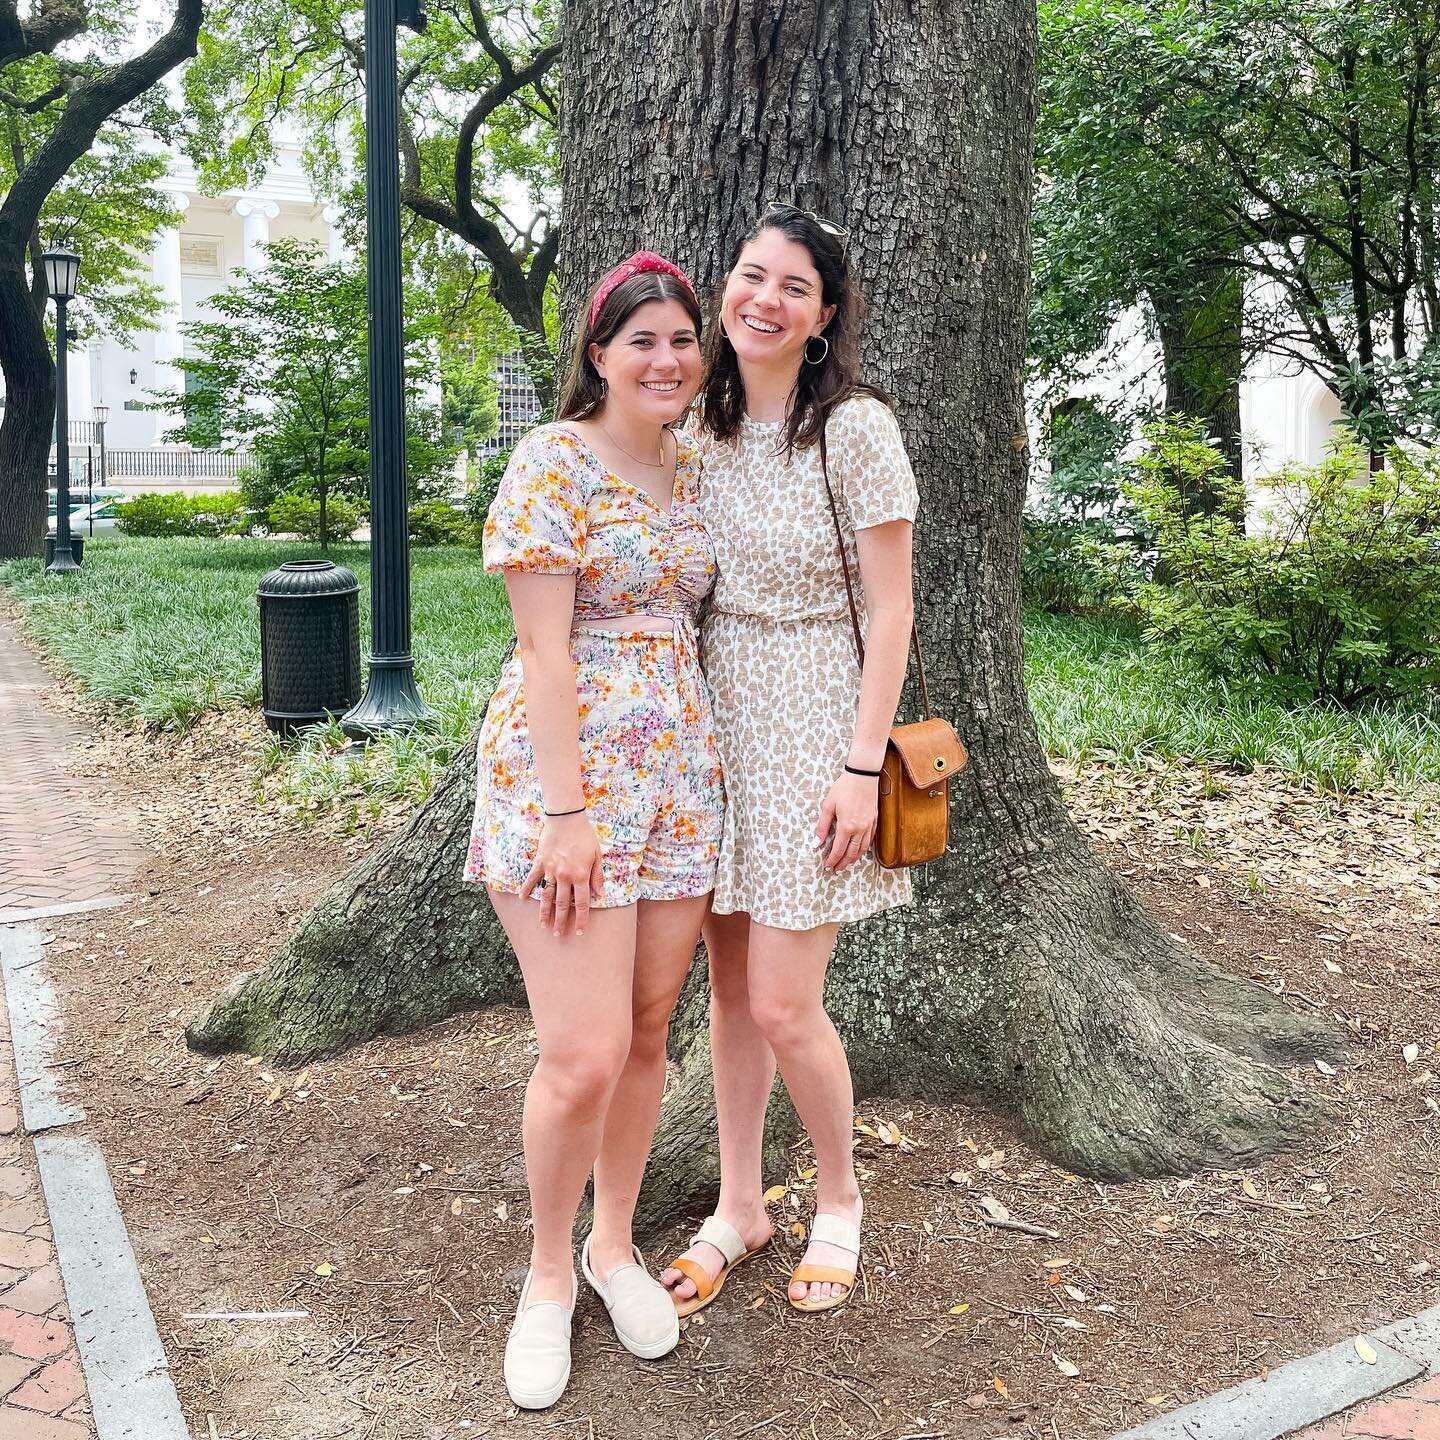 Surprise!! We&rsquo;re reunited!! ✨ Hint of Mint is back together in Savannah this weekend for a little trip and we are so excited! Check out our stories to see where this trip takes us!!
&bull;
&bull;
&bull;

#smallbiz #custom #communityovercompetit